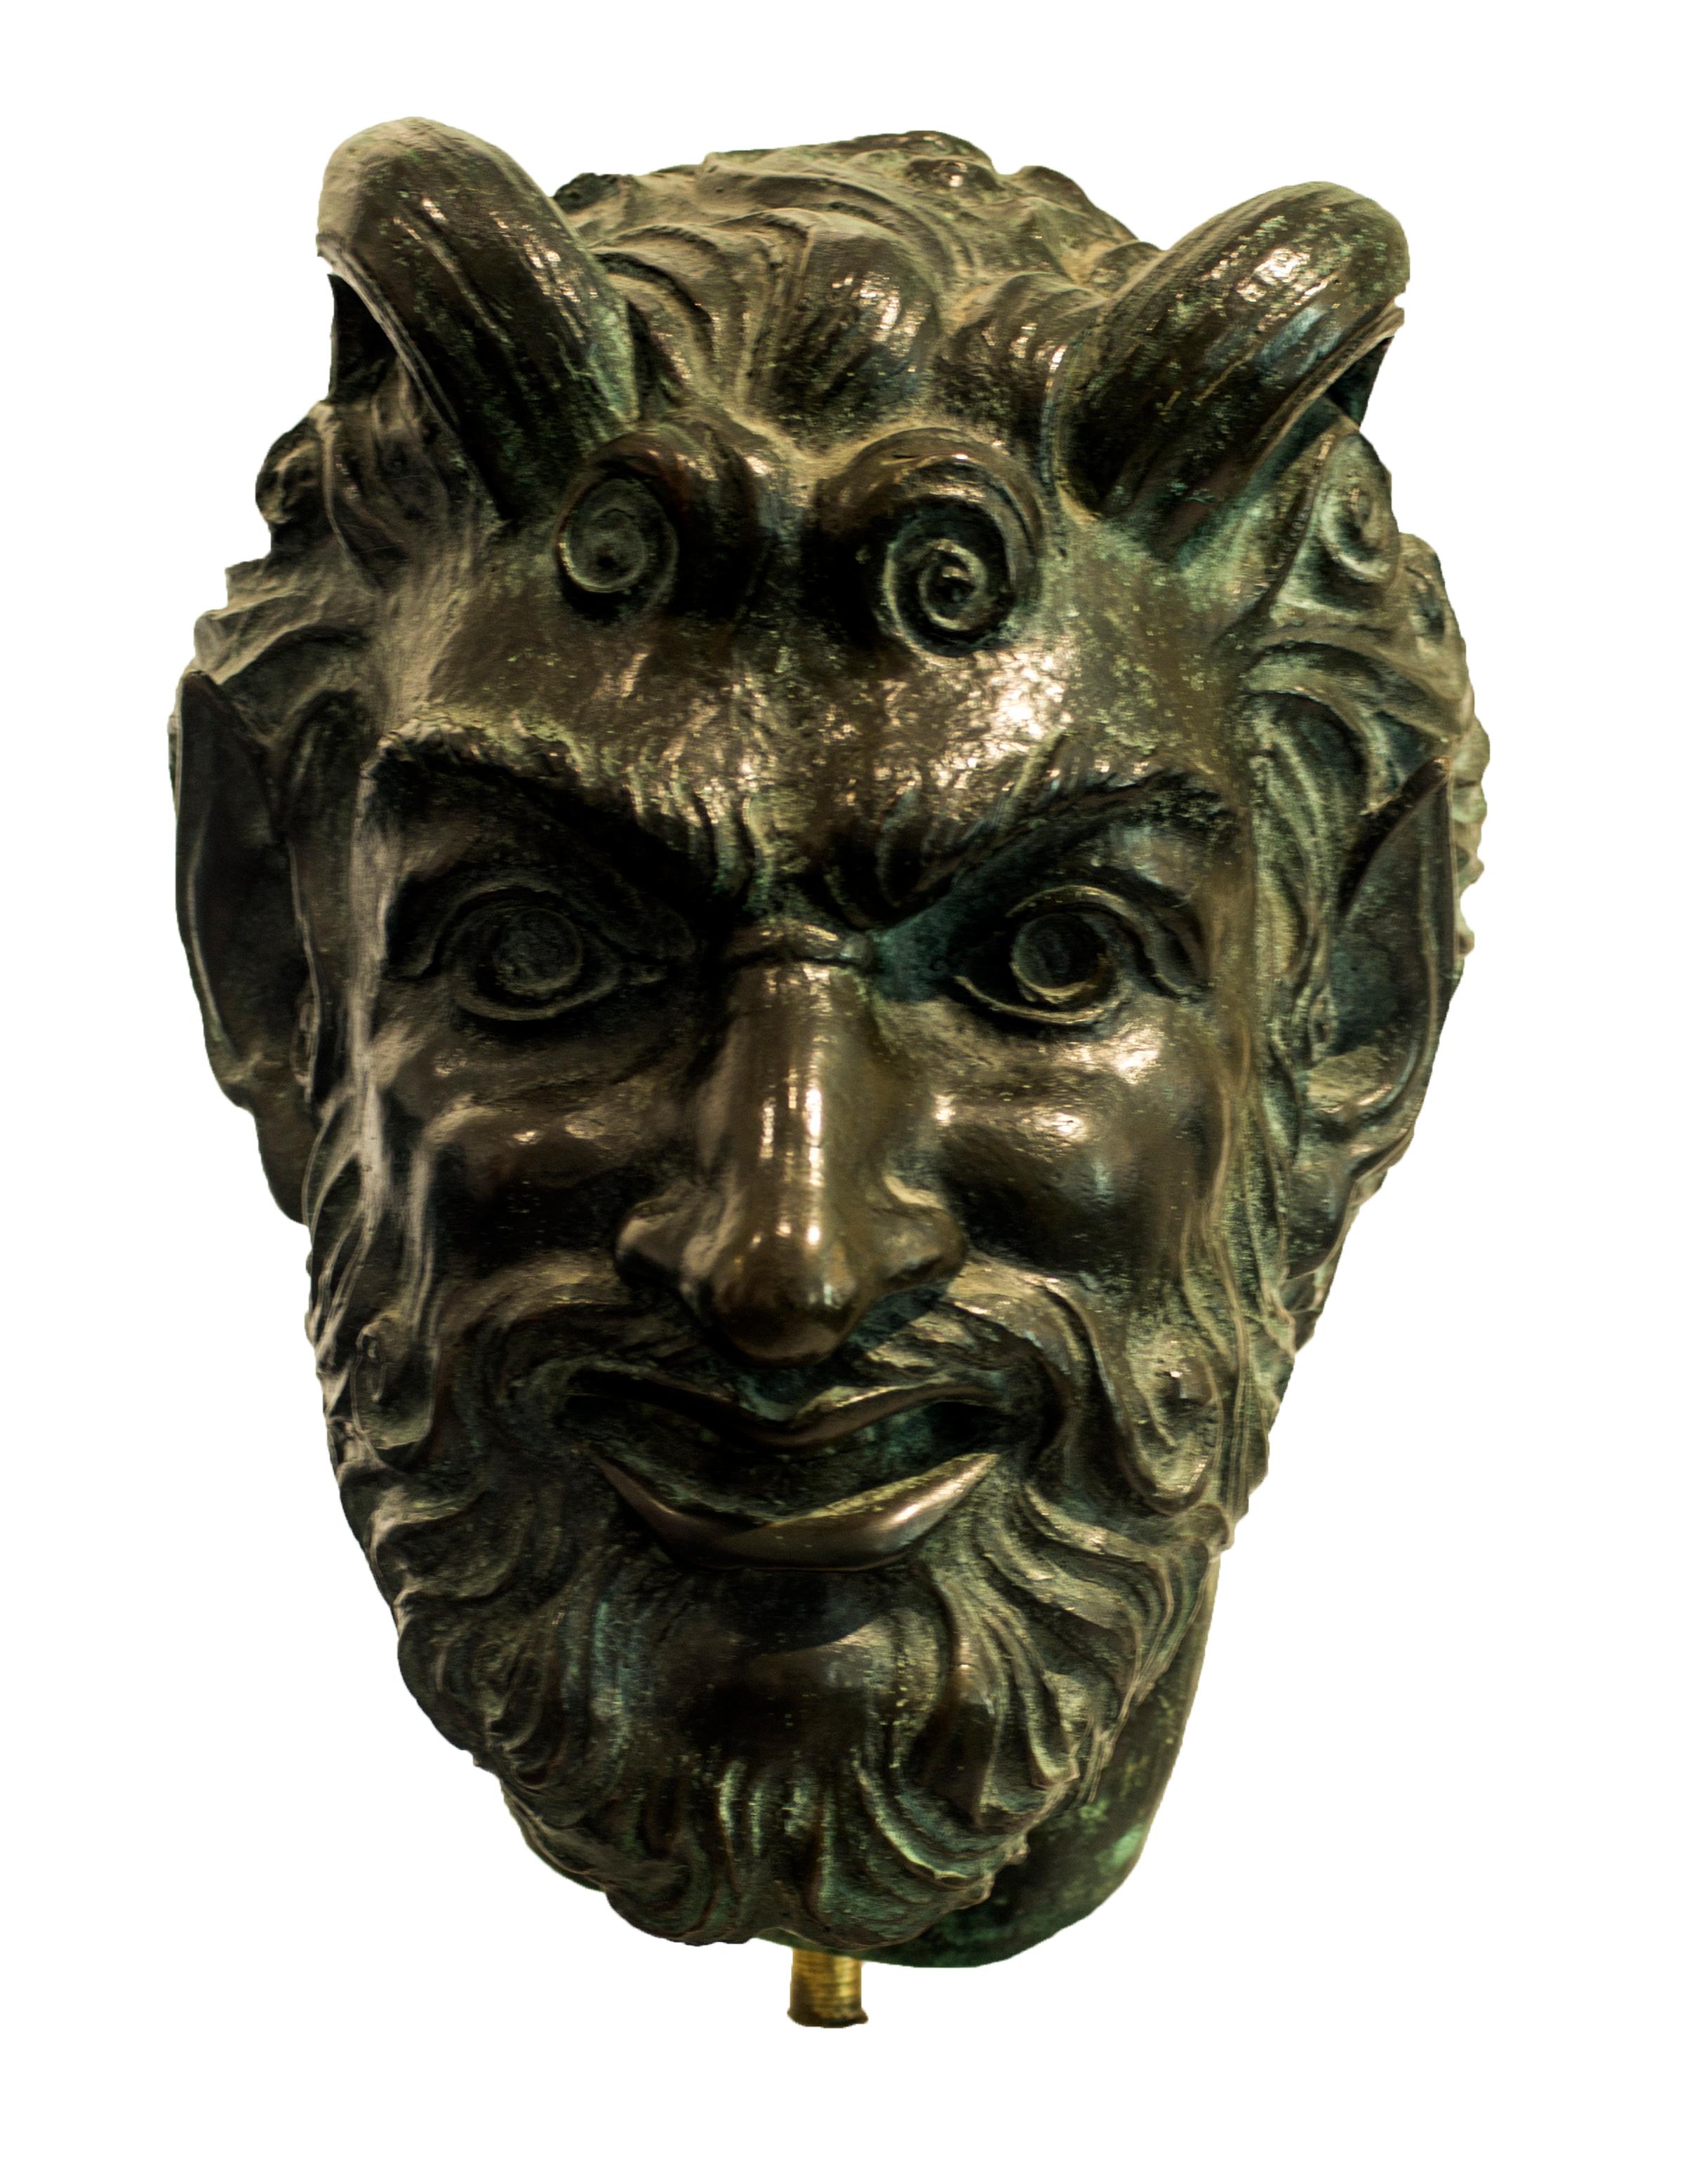 Bronze head sculpture realized by Giulio Aristide Sartorio, an Italian painter, sculptor and film director from Rome.

Having attended the Rome Institute of Fine Arts, Sartorio presented a Symbolist work at the 1883 International Exposition of Rome.